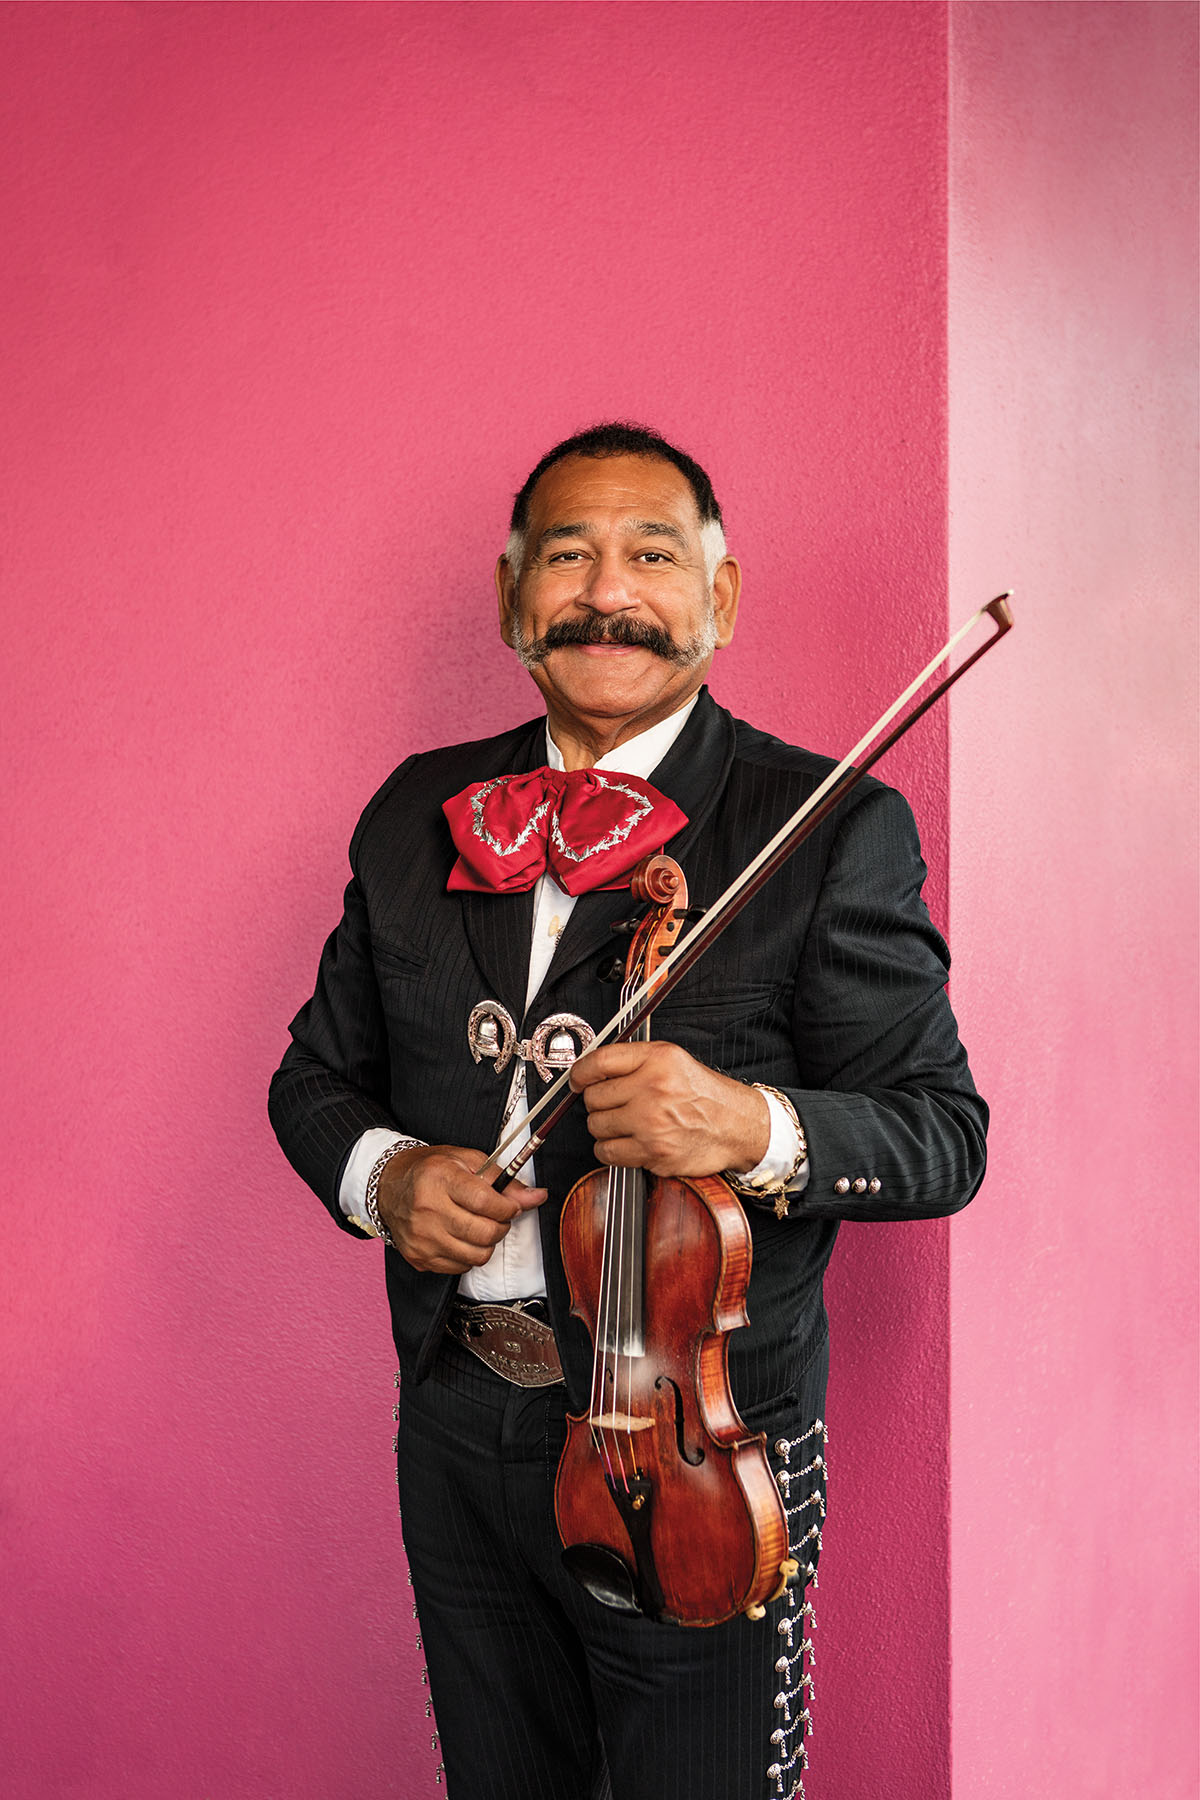 A man in a traditional Mariachi uniform stands in front of a bright pink wall